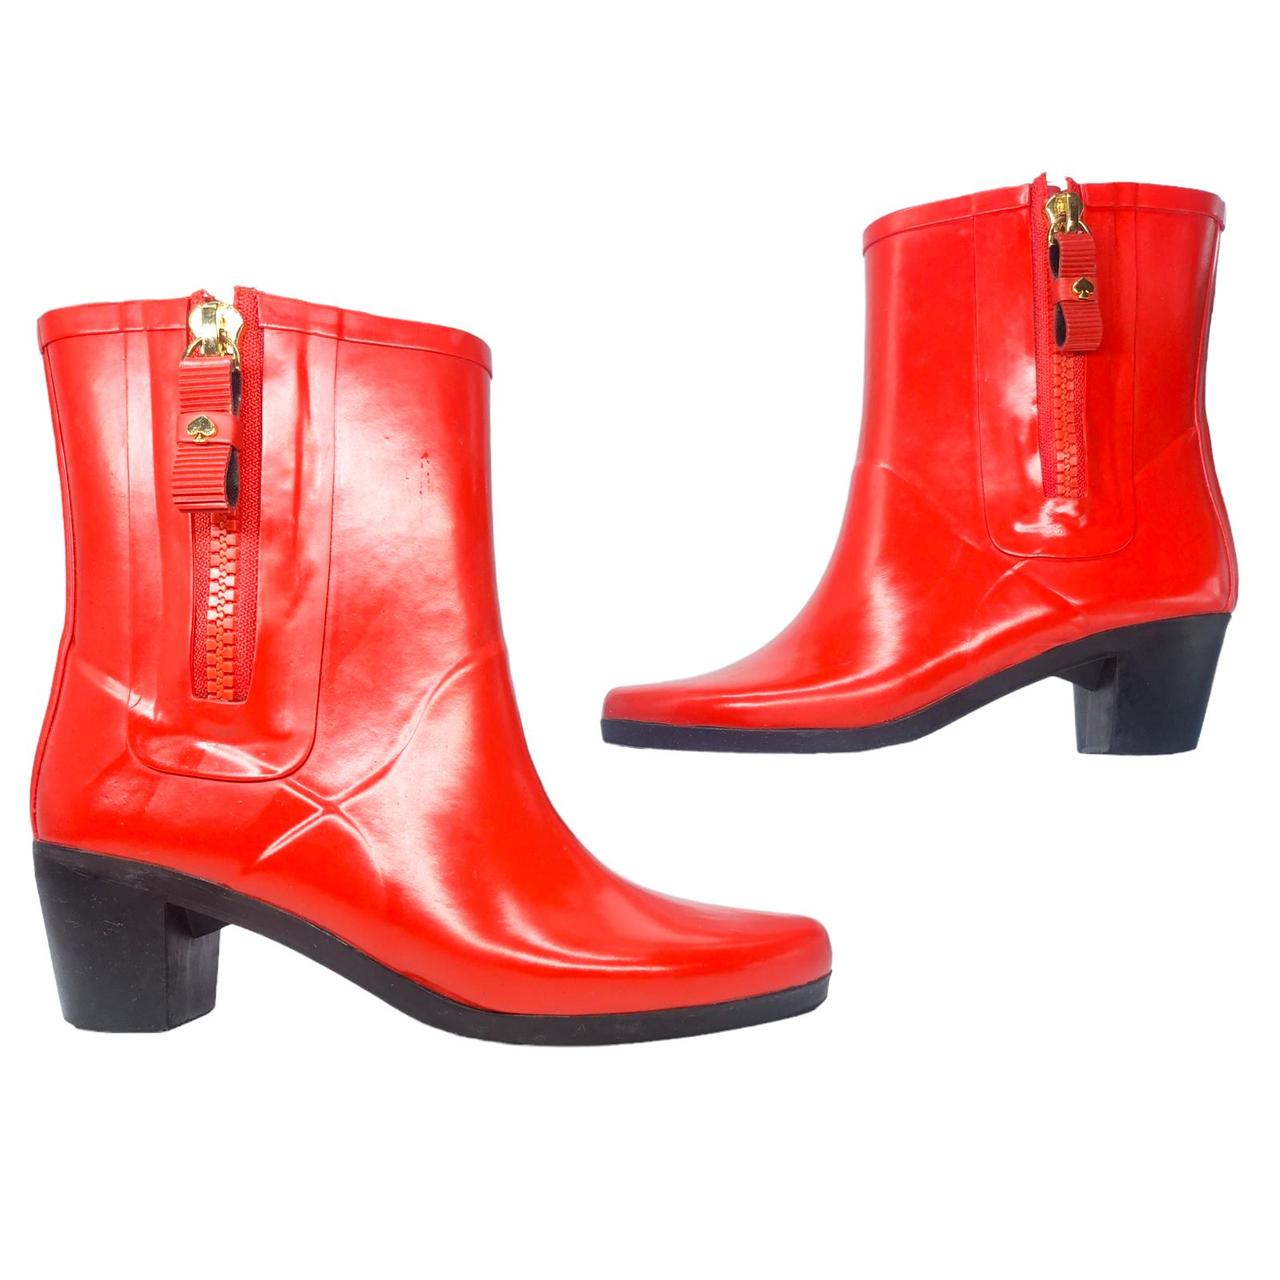 Women's Designer Leather Boots - New York Boots